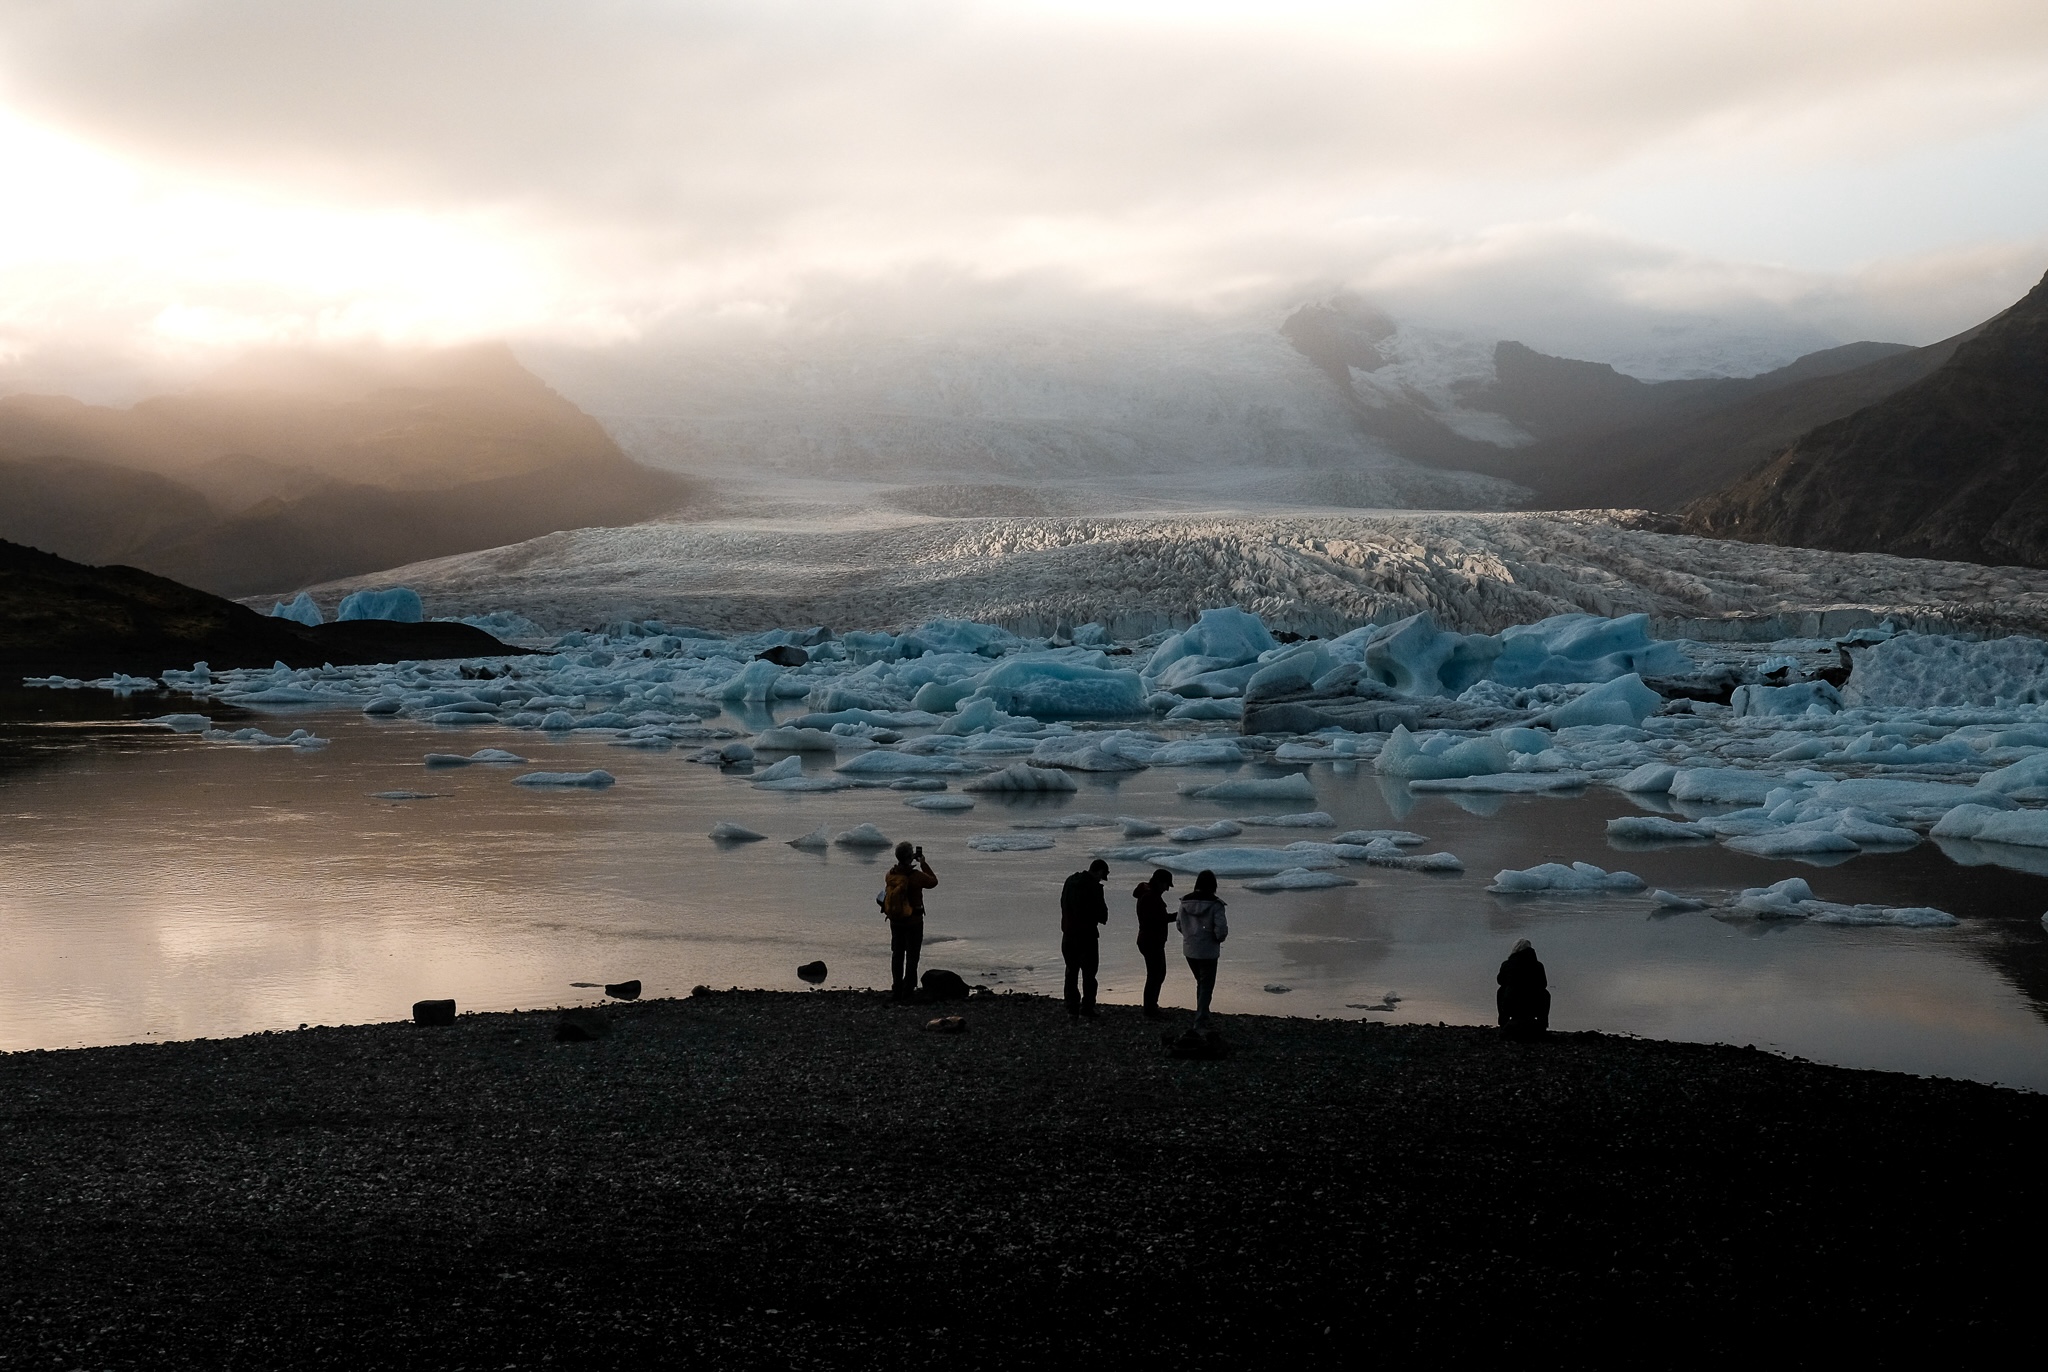 A silhouette of people enjoying the view and photographing a glacier moving down a mountain into a glaciel lake with large chunks of floating ice